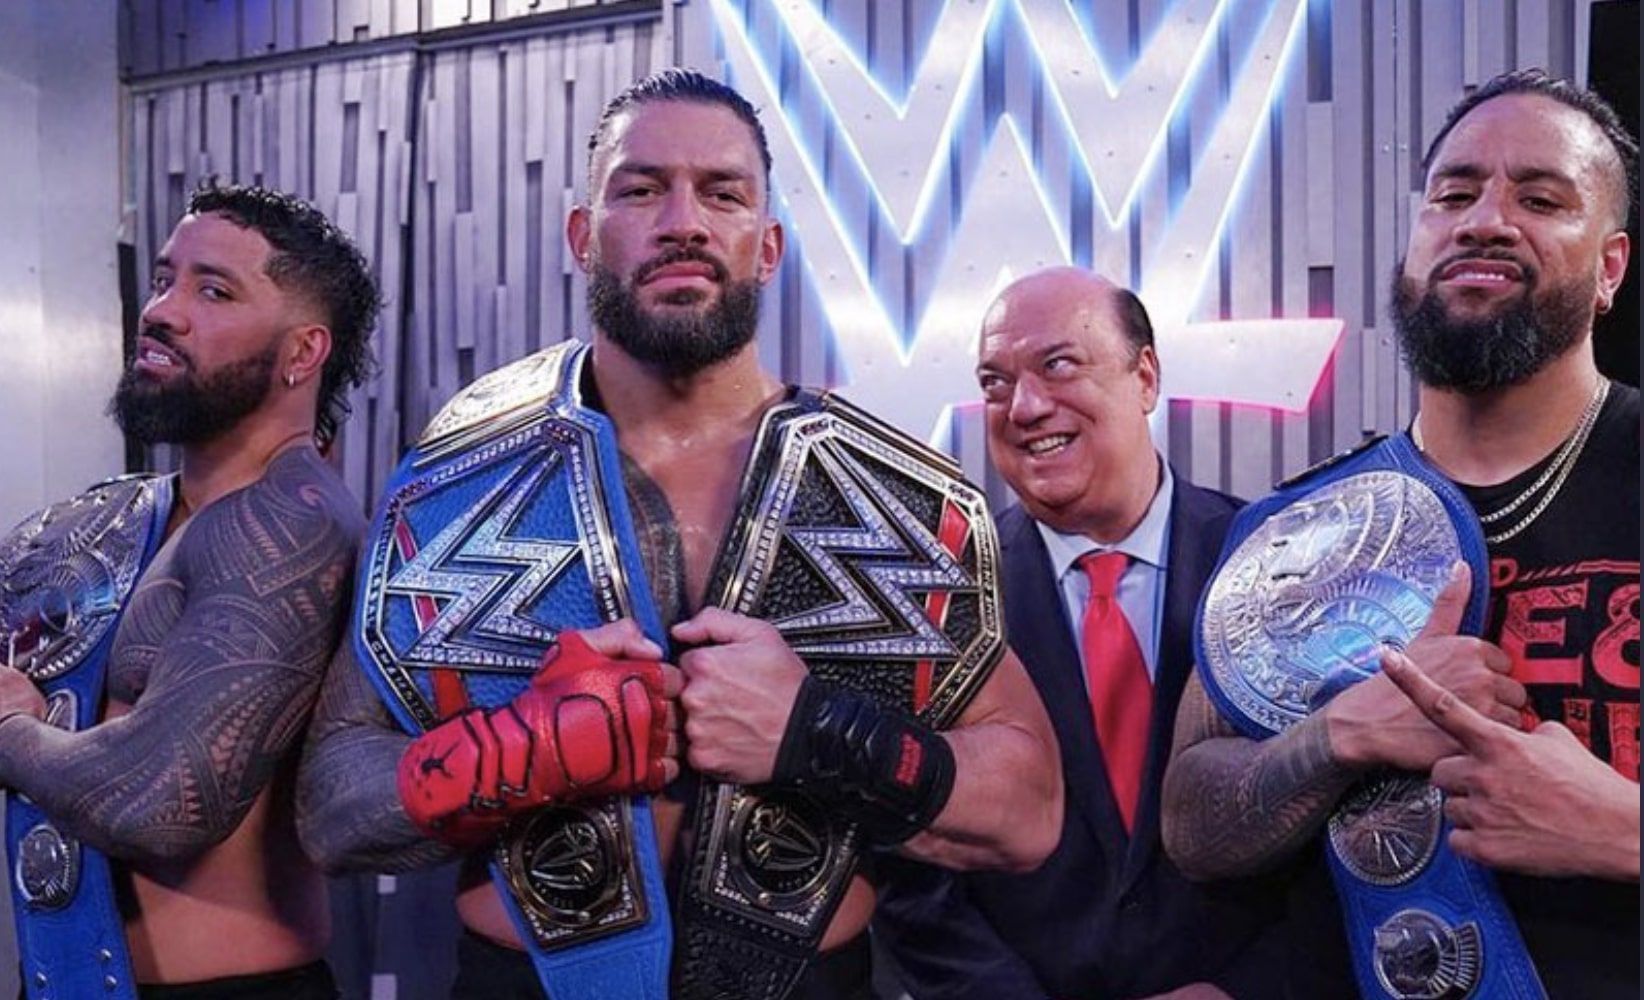 Roman Reigns could offer to give up one of the titles himself.